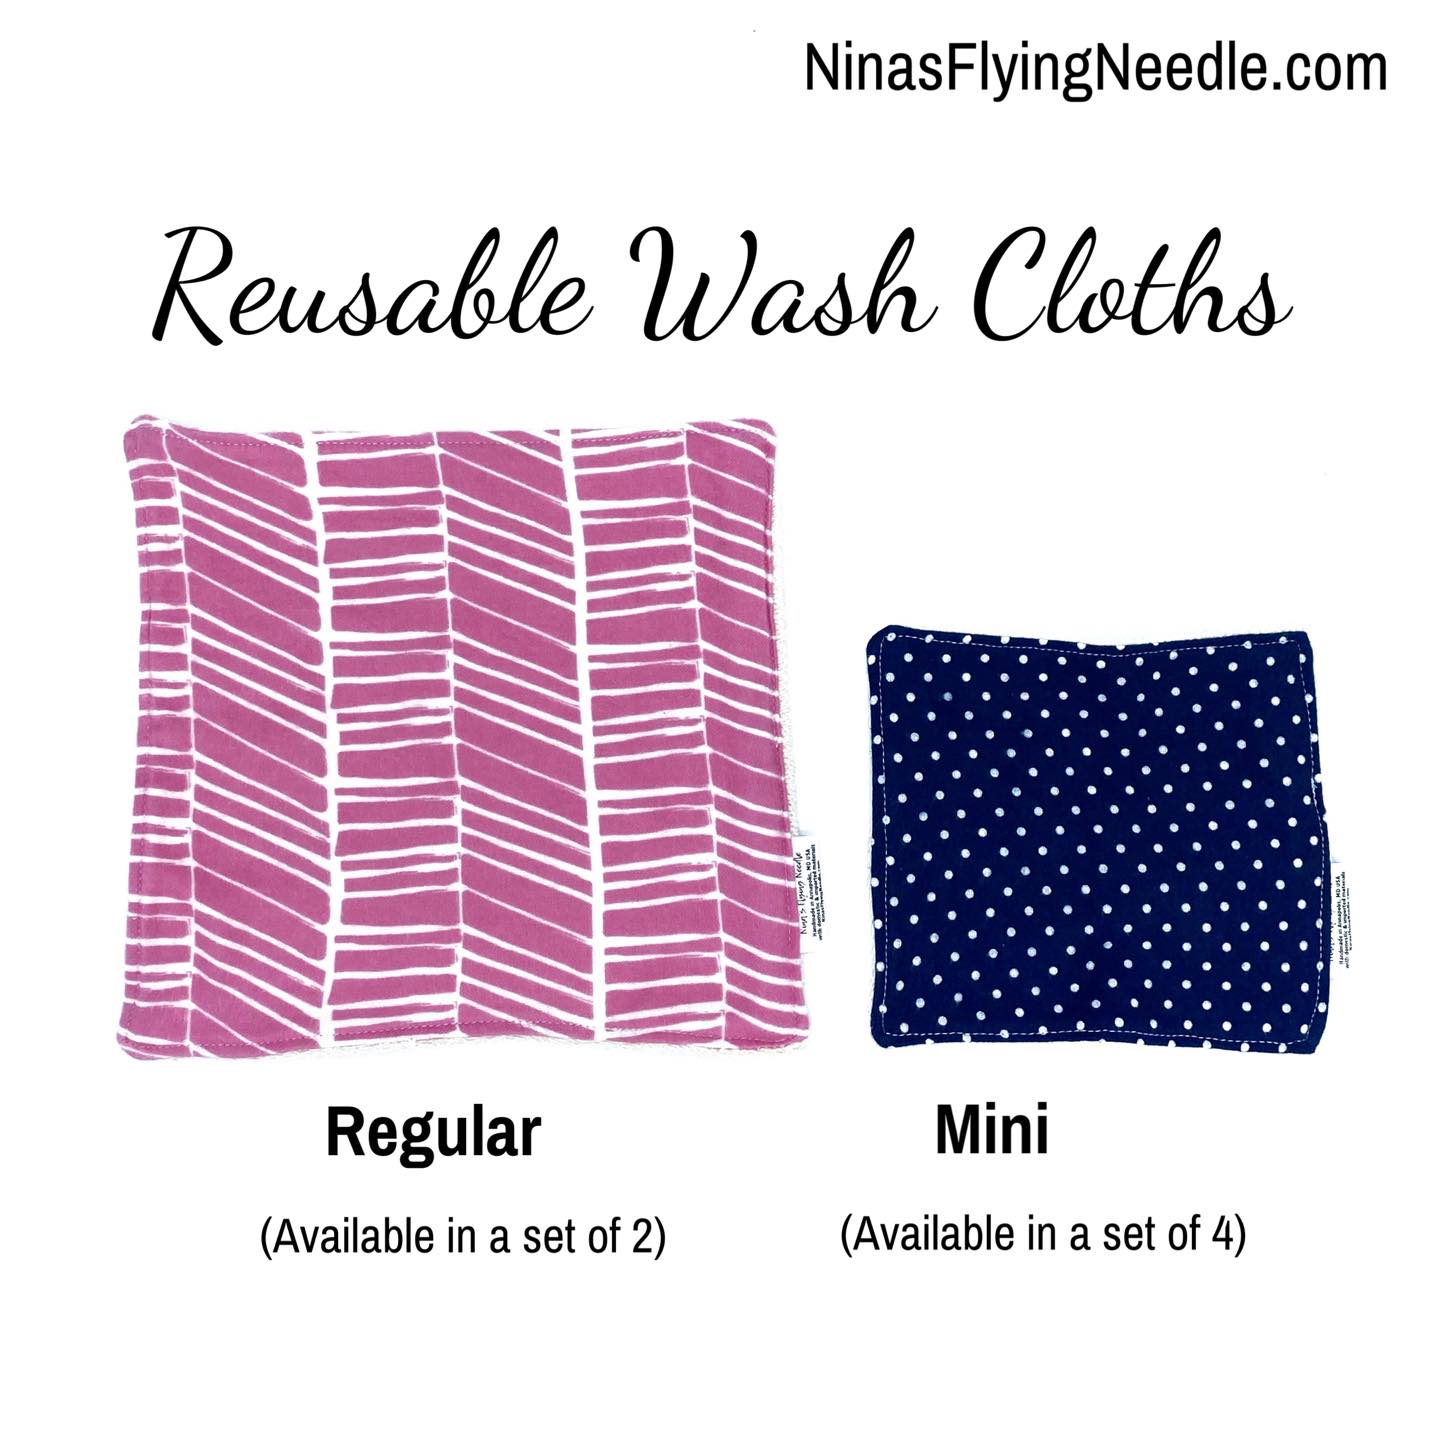 Wash Cloth - Regular - Mermaids and Solid Blue